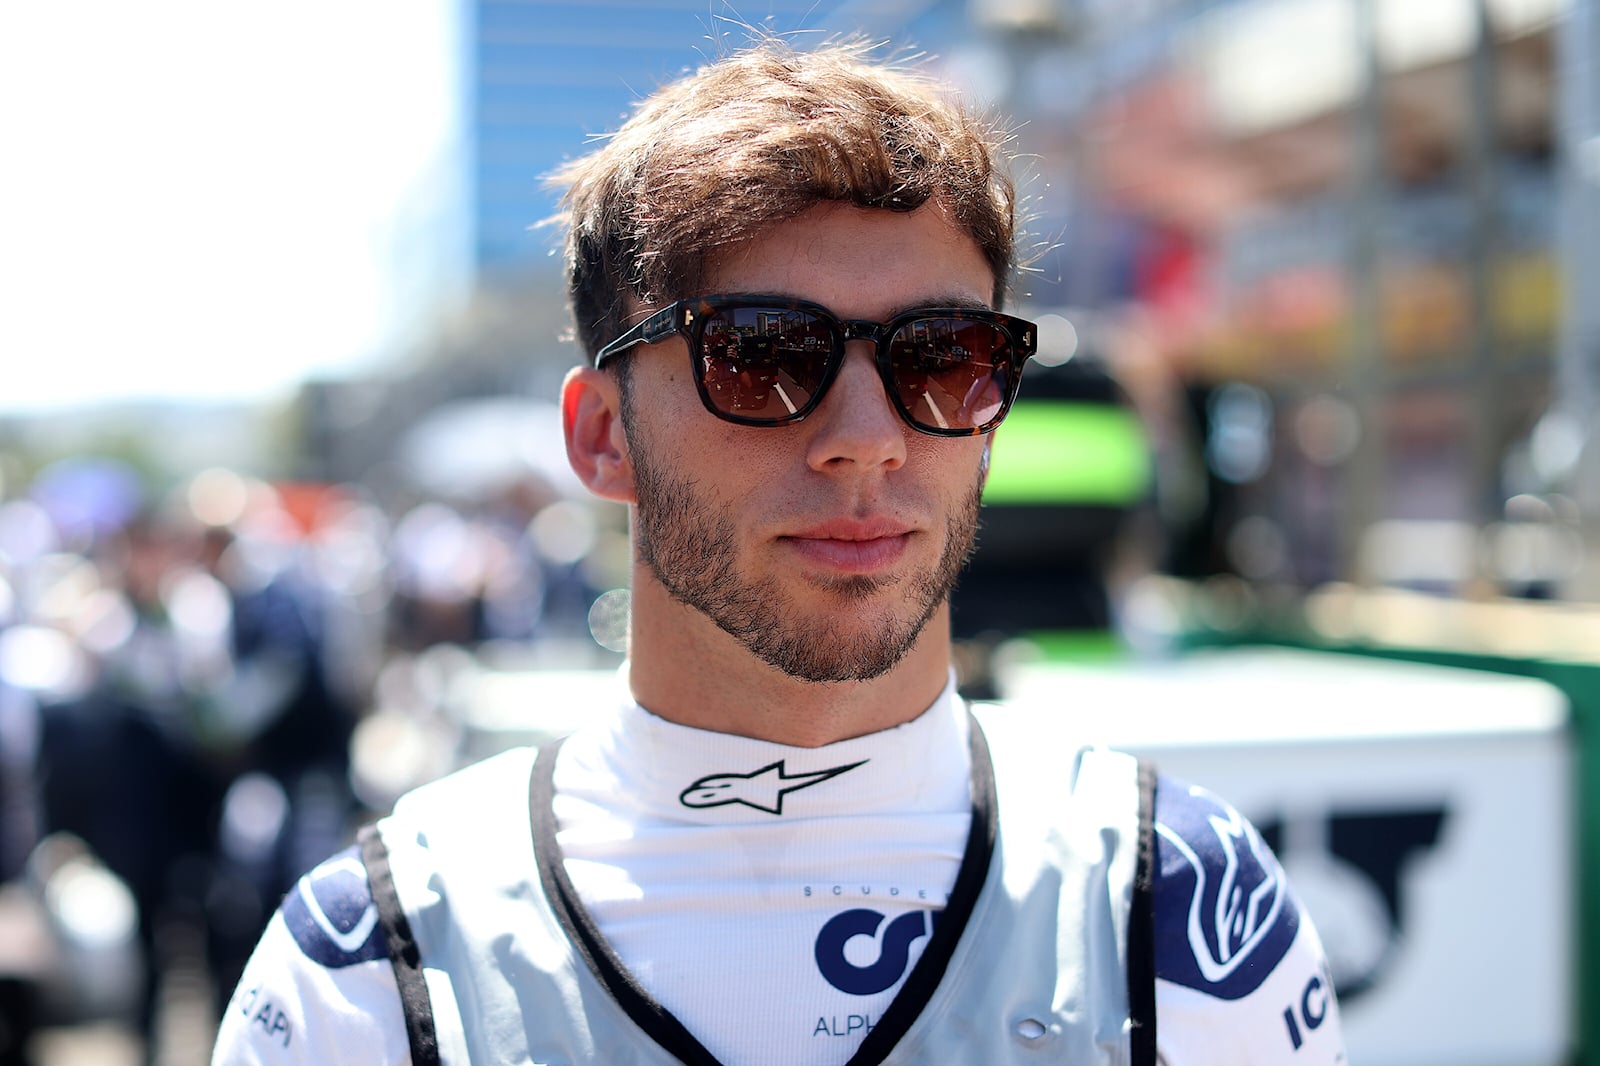 CONFIRMED: Pierre Gasly Moving To Alpine For 2023 Formula 1 Season